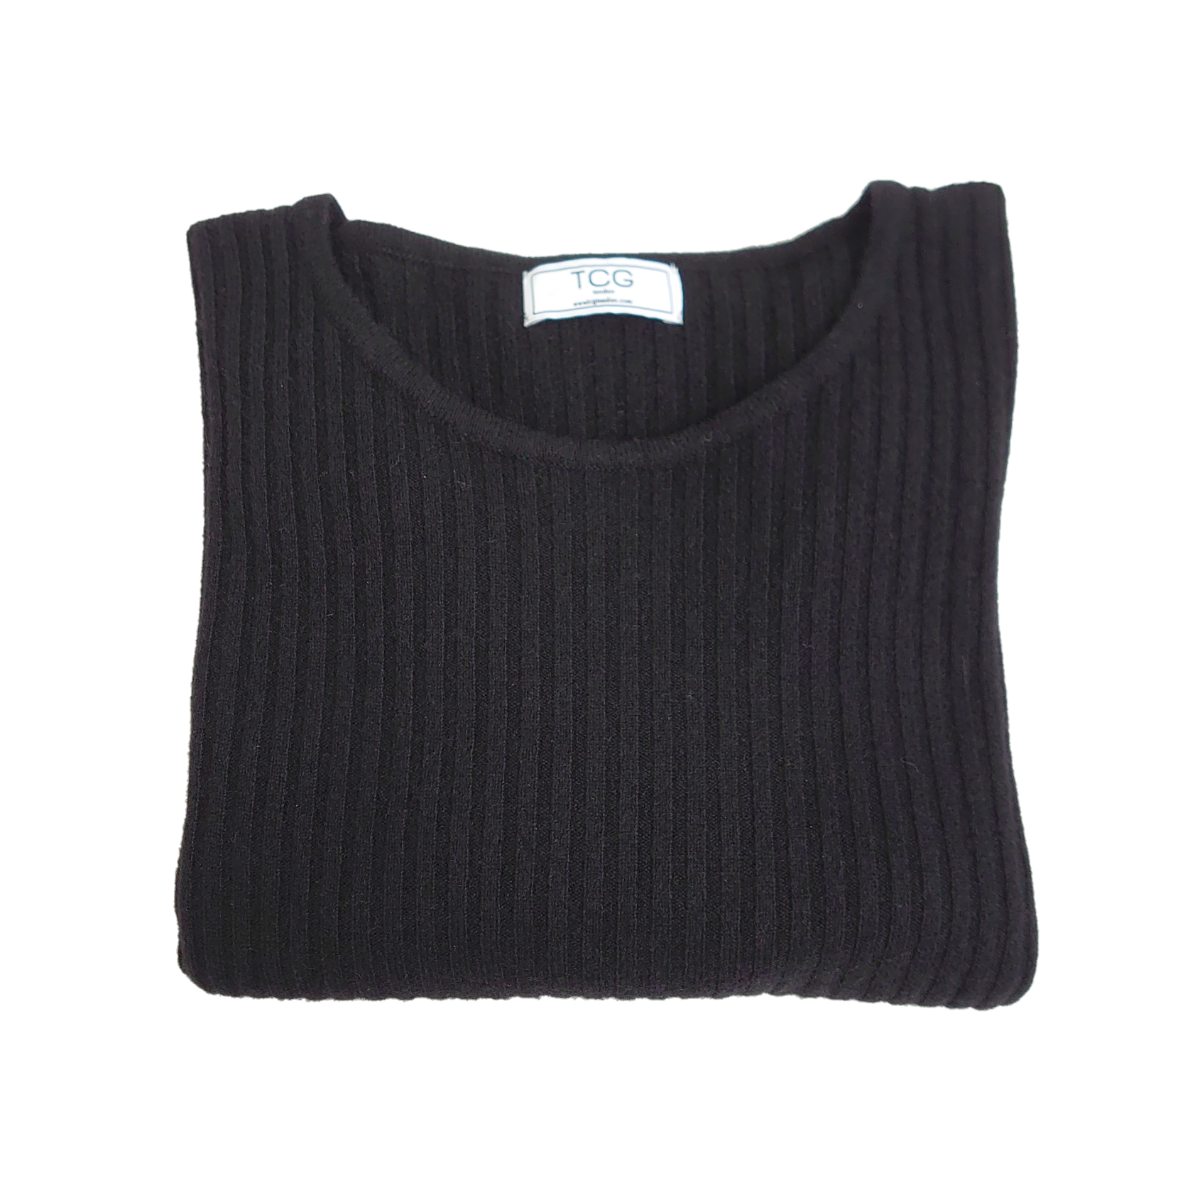 Ladies Ribbed Round Neck 100% Pure Cashmere Jumper - Black - XL long